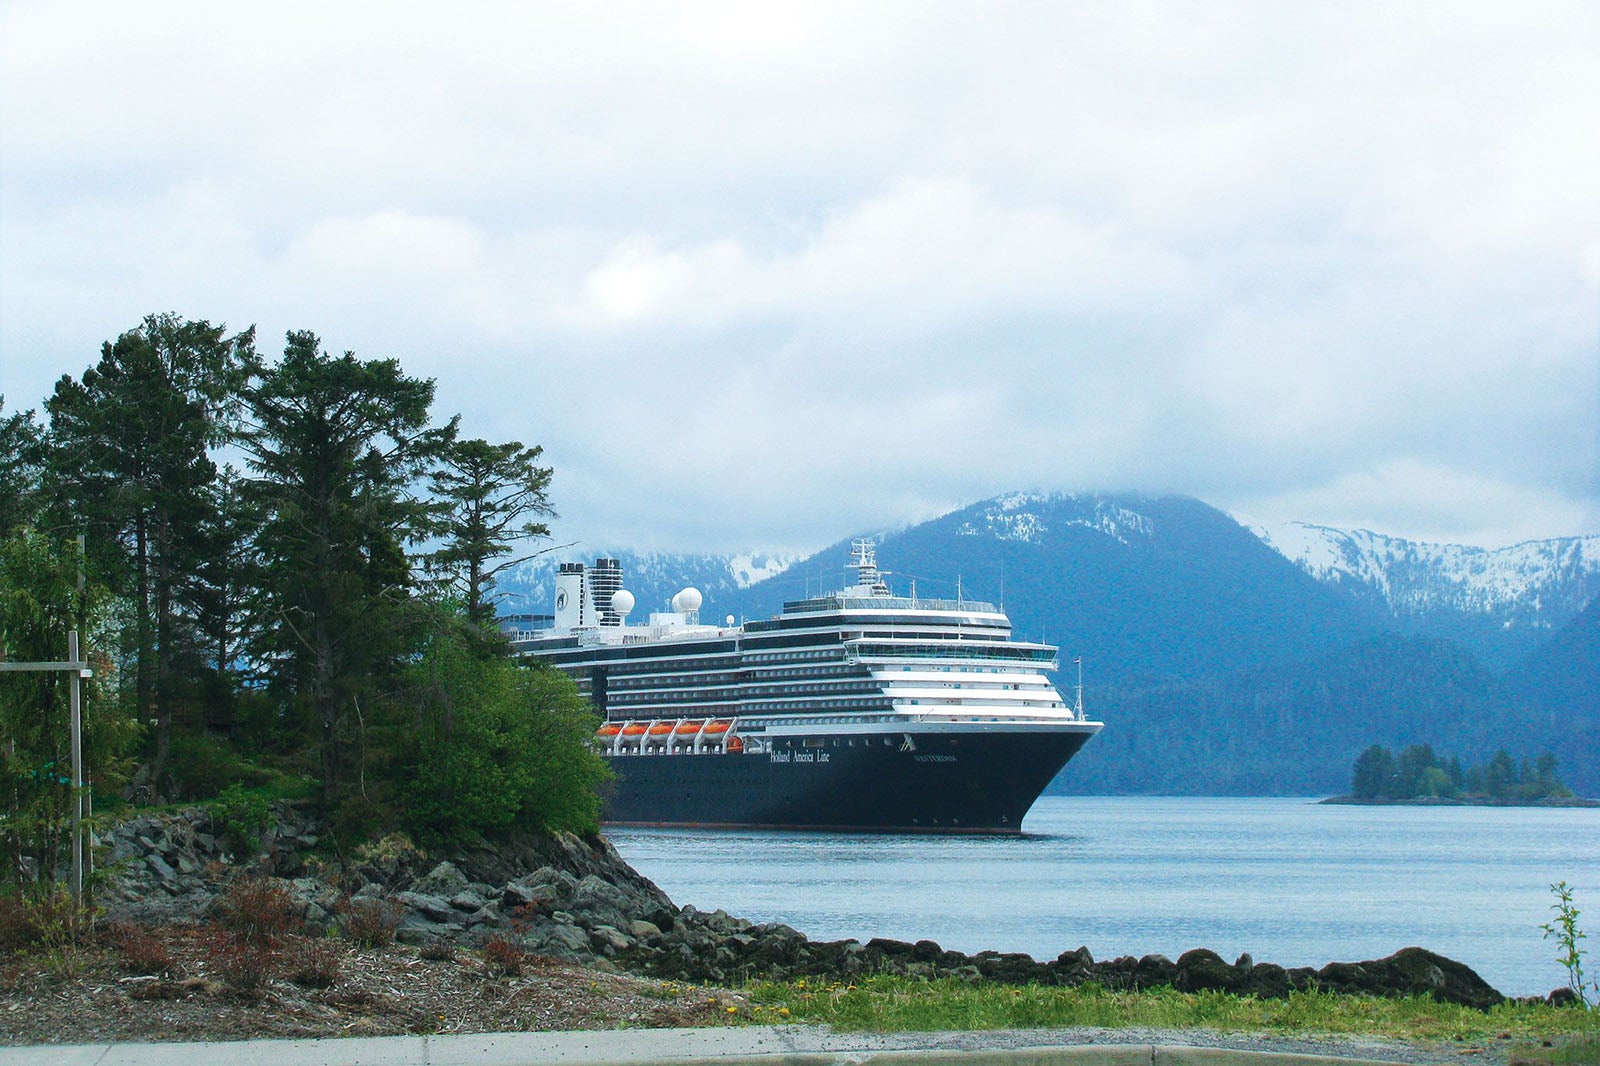 Holland America cruise ship passing by mountains and forest in Sitka, Alaska